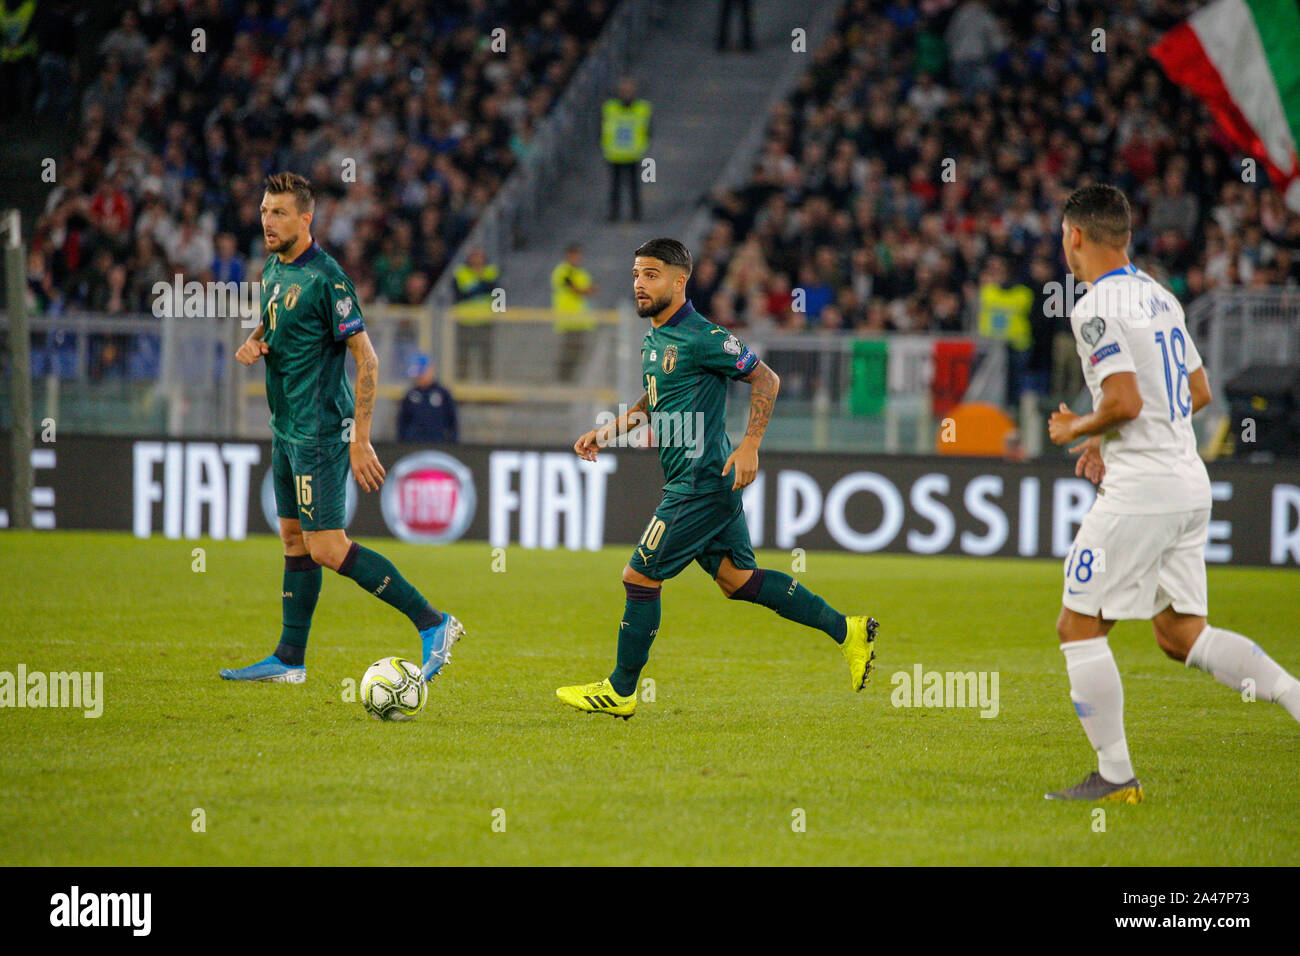 Rome, Italy. . 12th Oct, 2019. 22/10/2019 Rome, Football match between ITALY vs GREECE valid for the European football championships.In picture .Lorenzo Insigne Credit: Fabio Sasso/ZUMA Wire/Alamy Live News Stock Photo